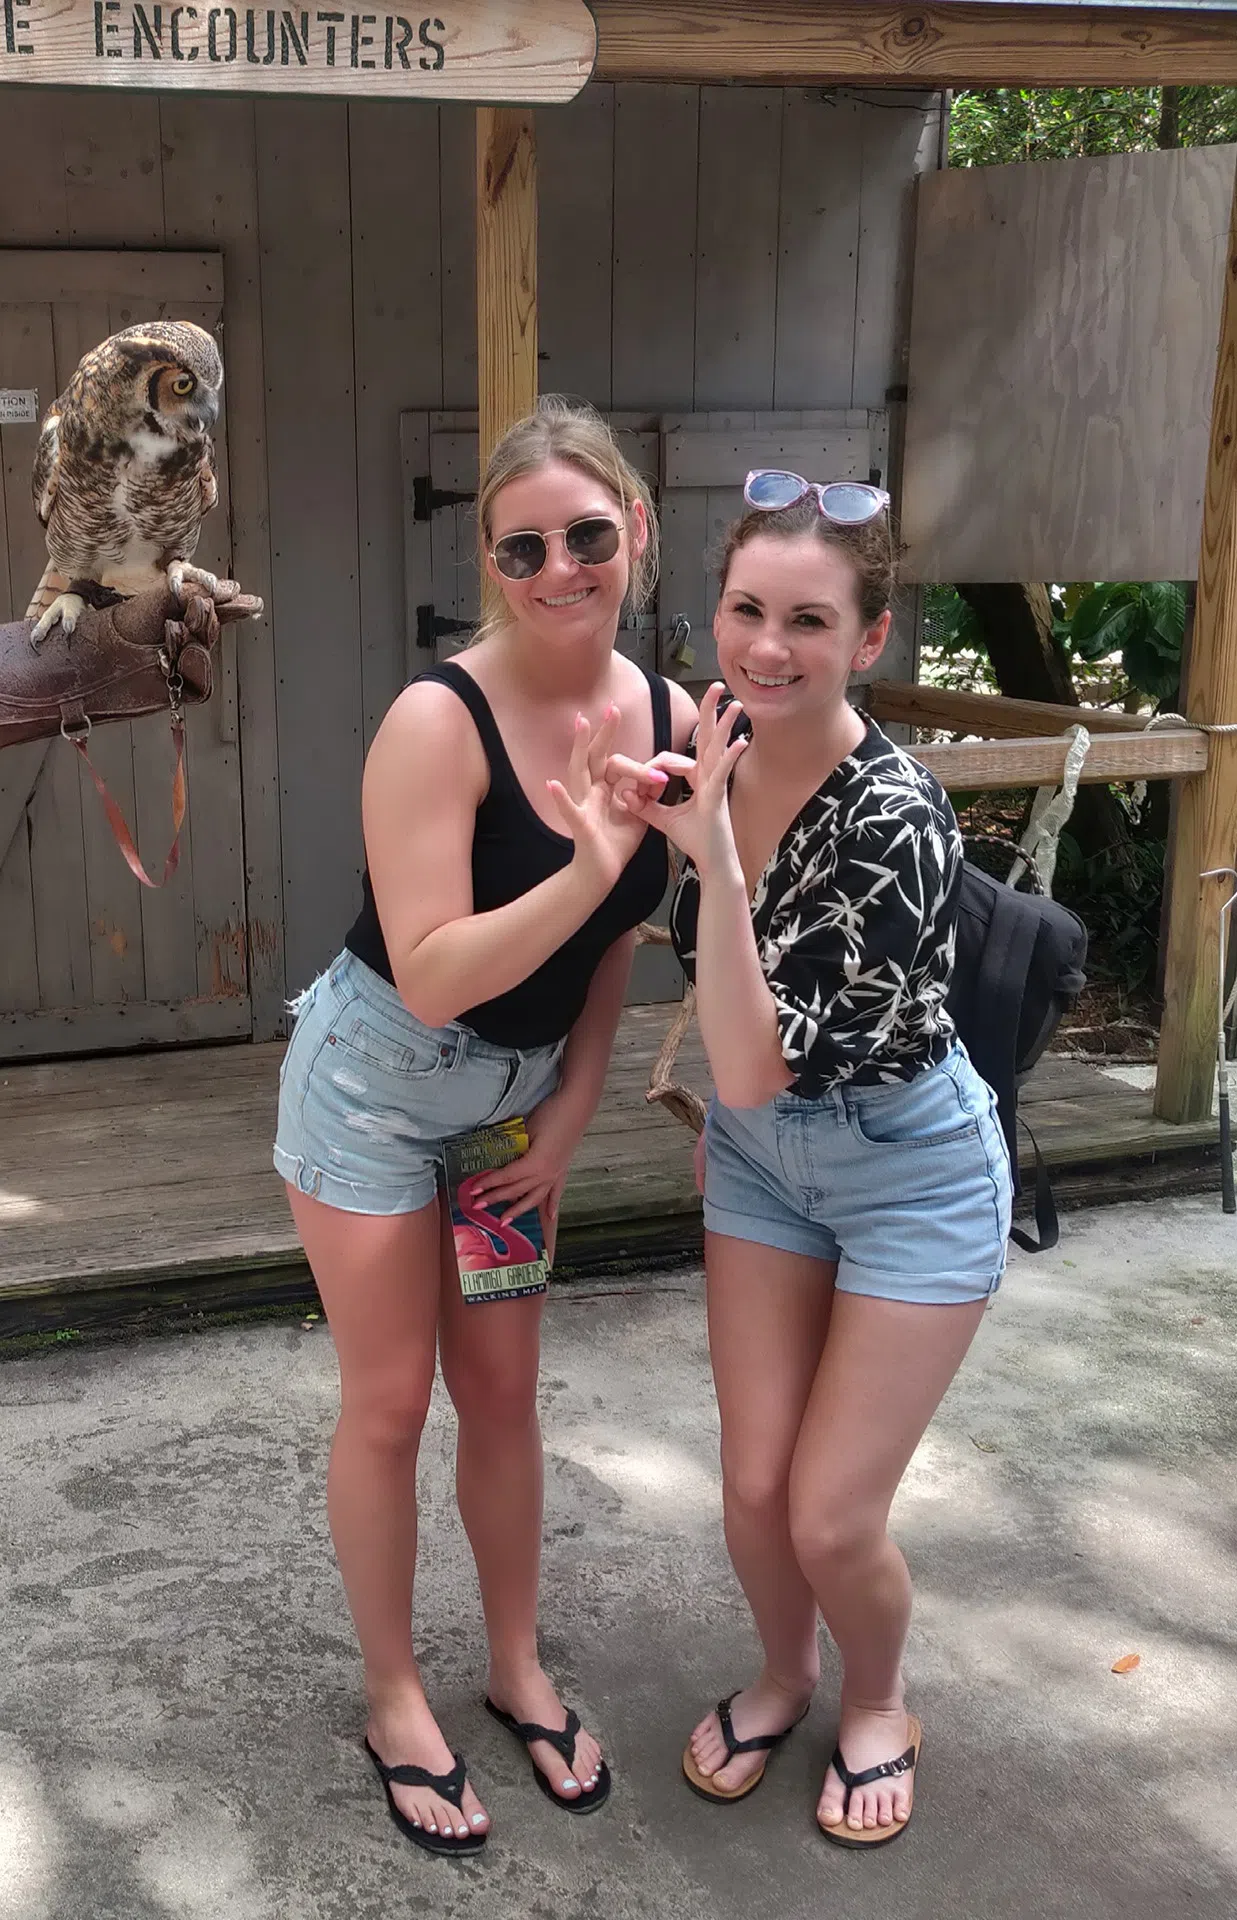 Two Sigma Alpha Tau (Owls) sorority sisters pose next to a live trained owl on a nearby perch.